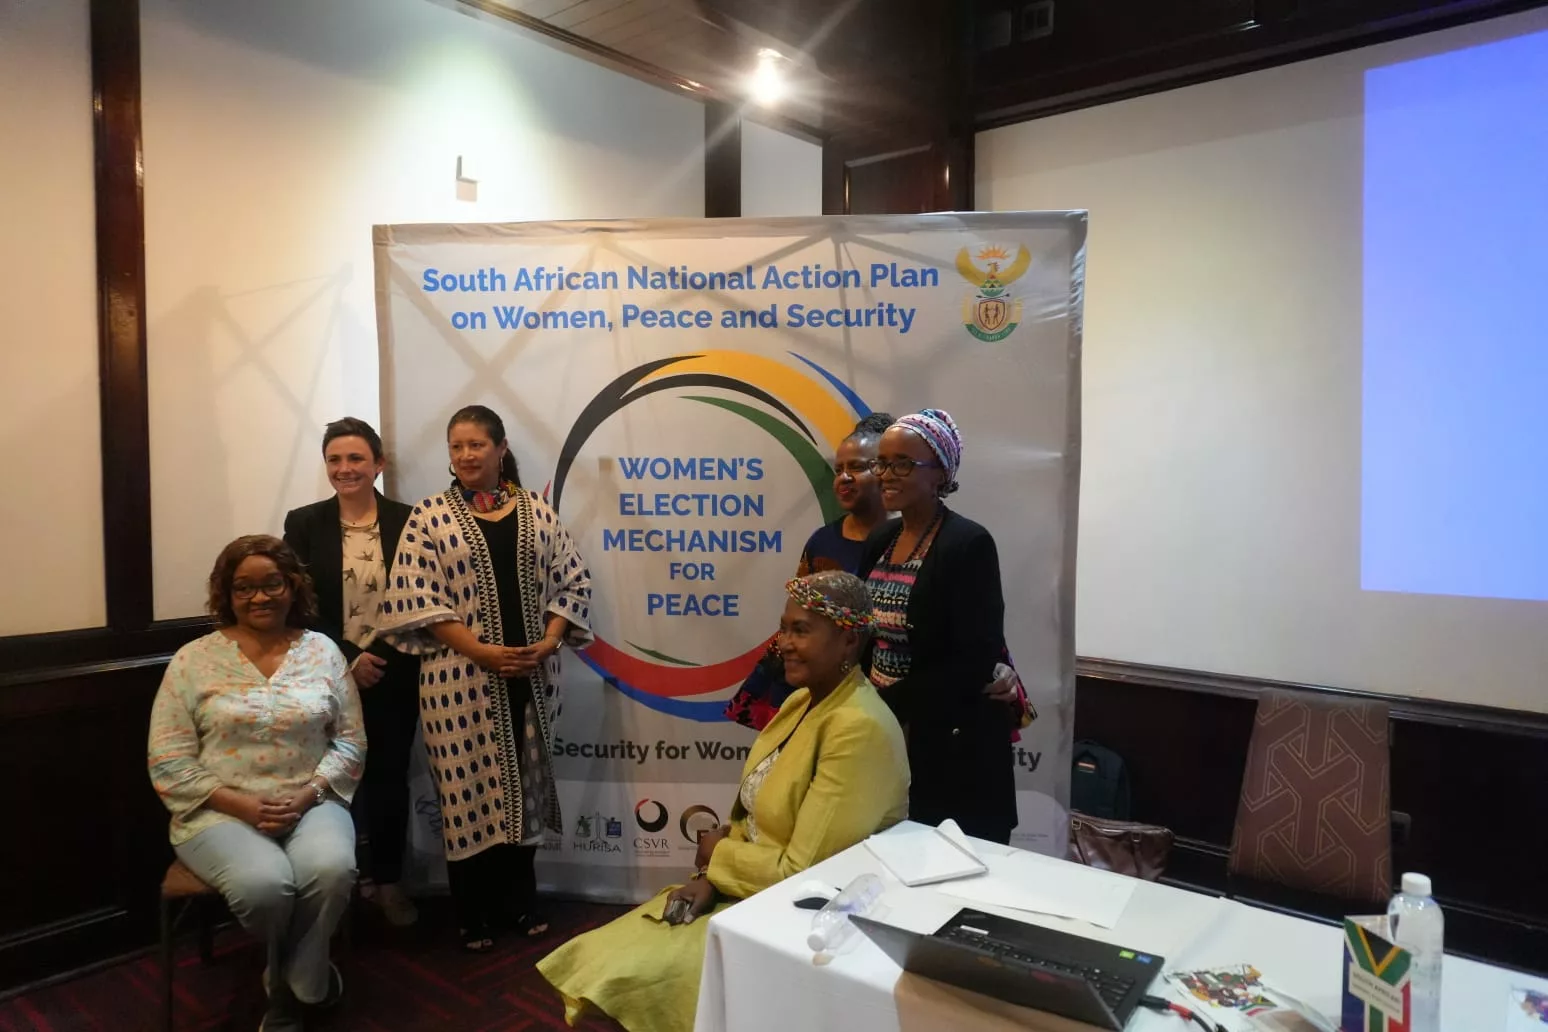 Women call for equitable governance post-elections in South Africa